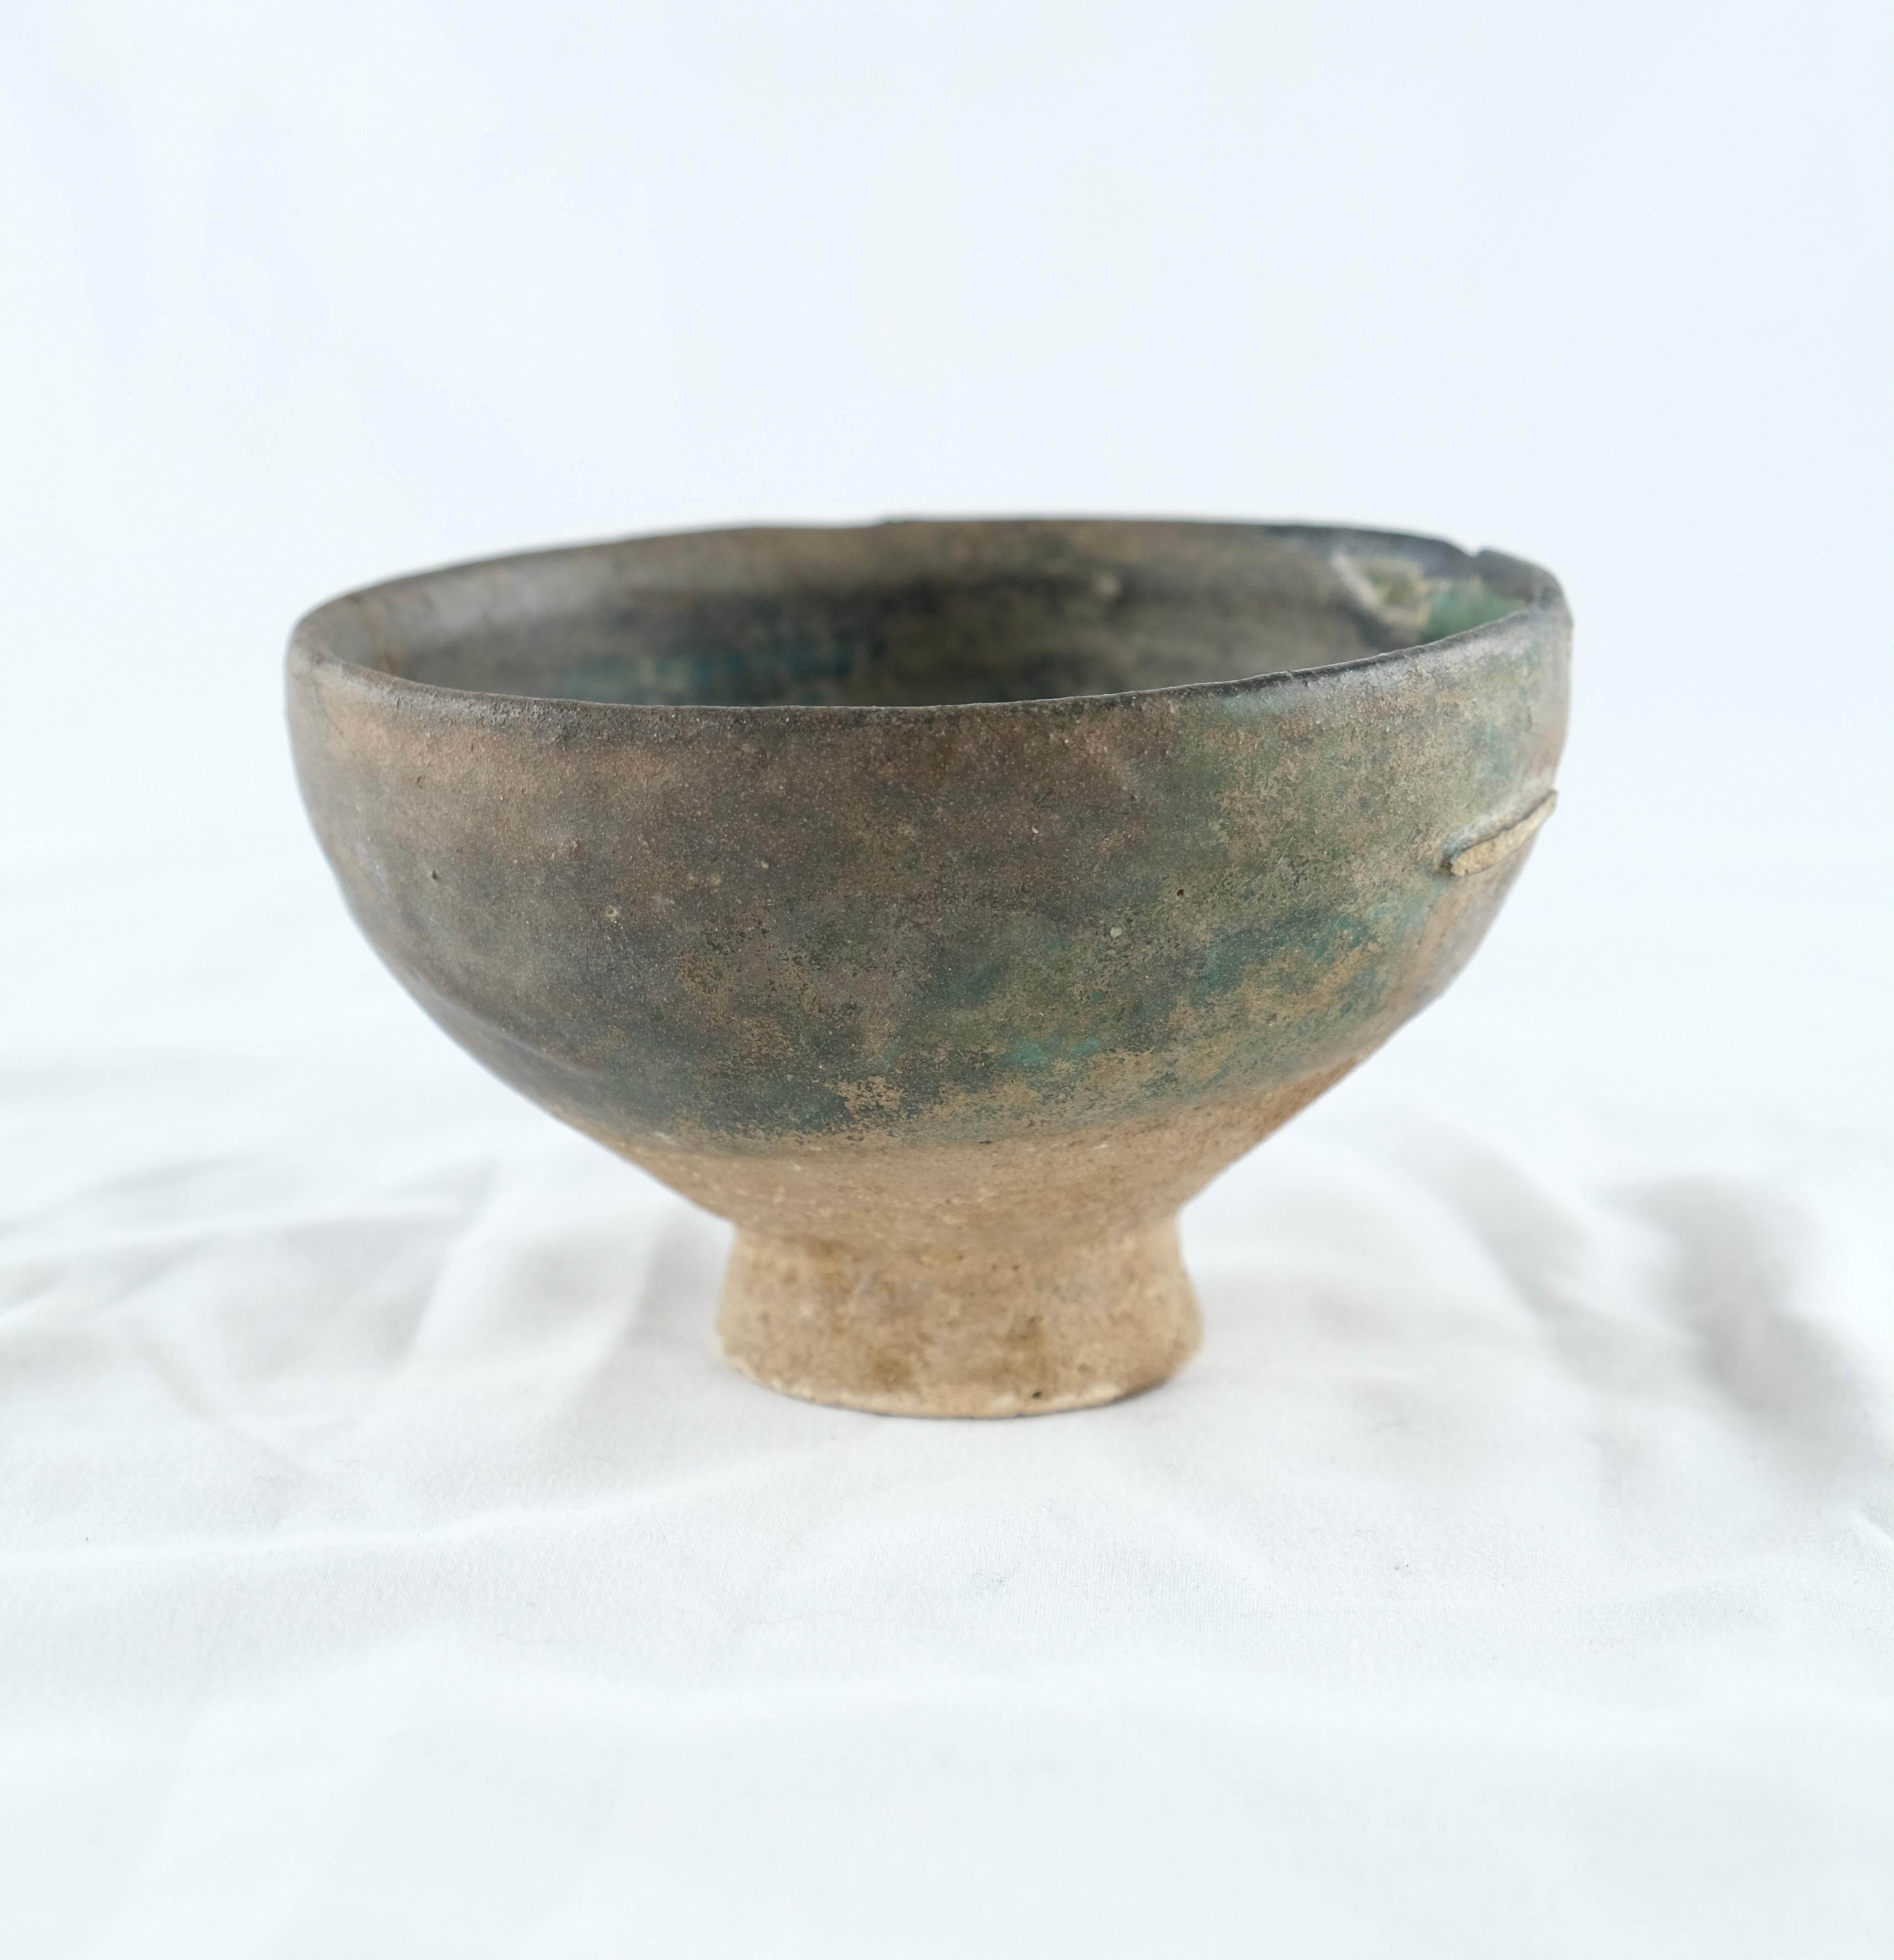 A Japanese Chawan. Glazed pottery. 19th century or older. Provenance: Swedish early 20th century collection.